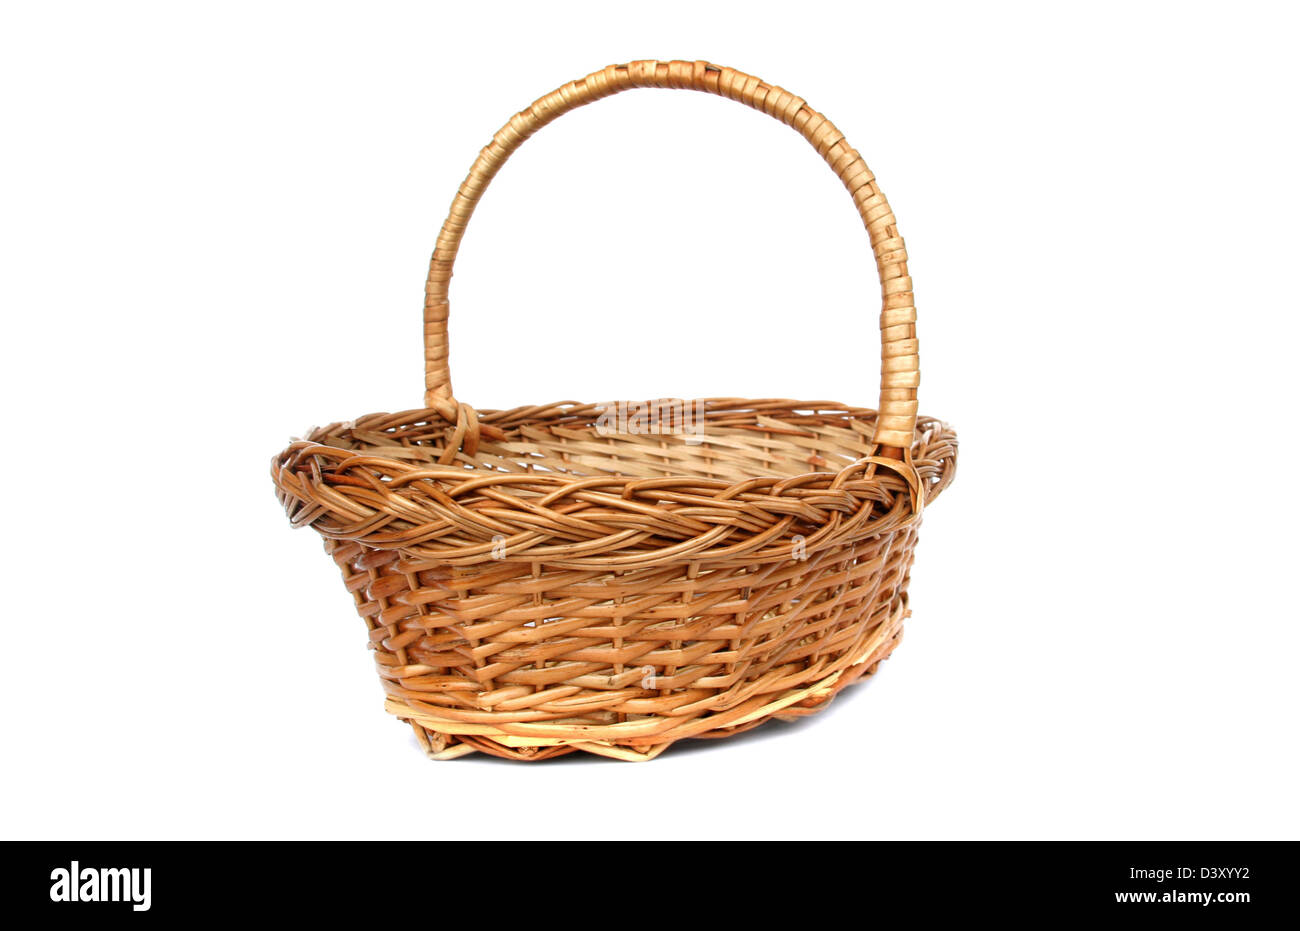 Wintage willow basket for fruits Stock Photo